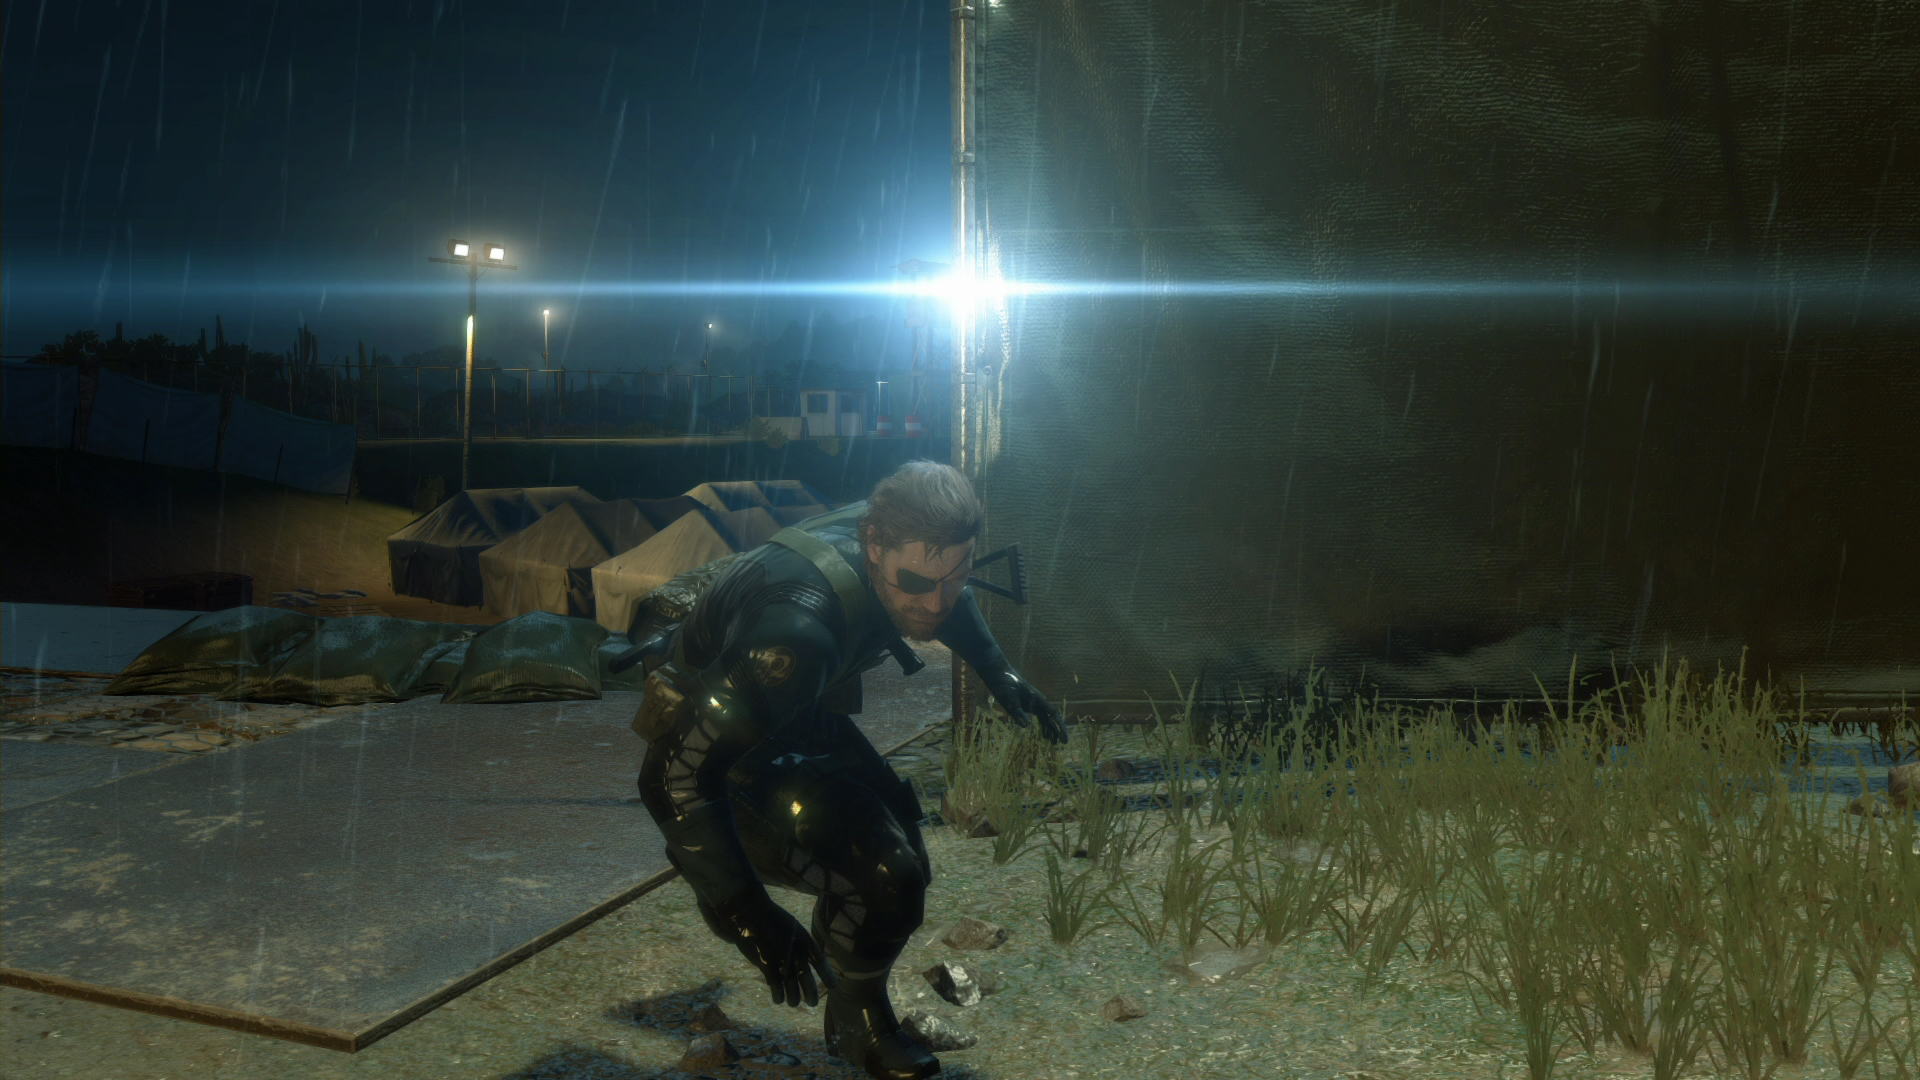 metal-gear-solid-v-ground-zeroes-1080